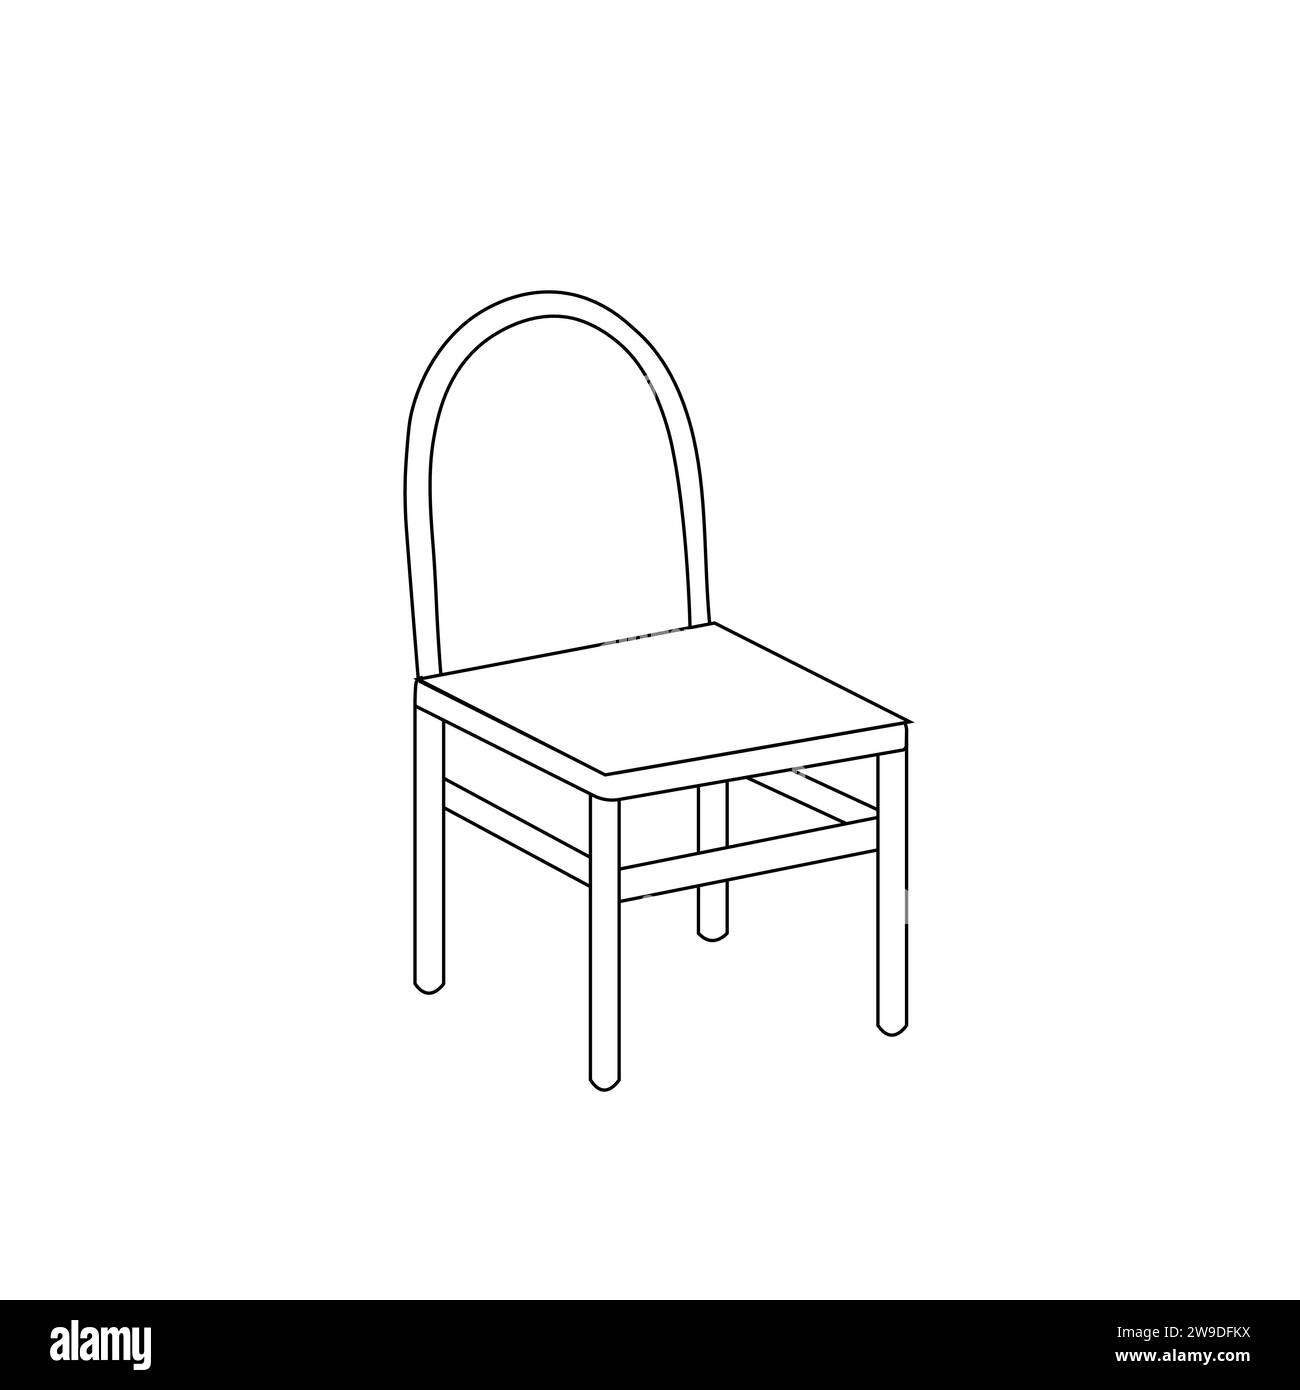 Black outline of interior item isolated on a white background. Chair with black outline. Coloring Page. Coloring book. coloring page for kids. Stock Vector